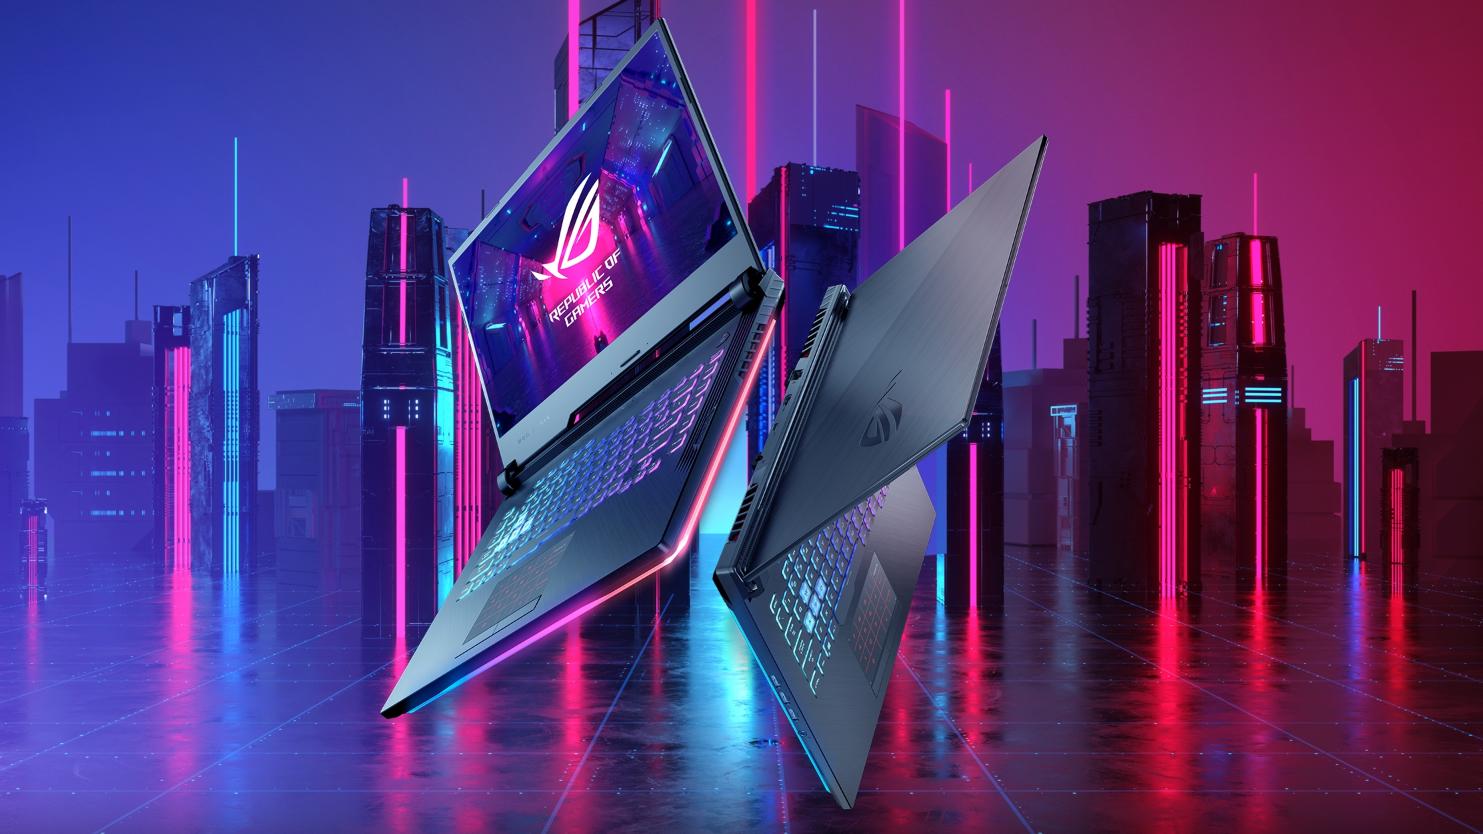 Best Gaming Laptops with Big Screens In 2021